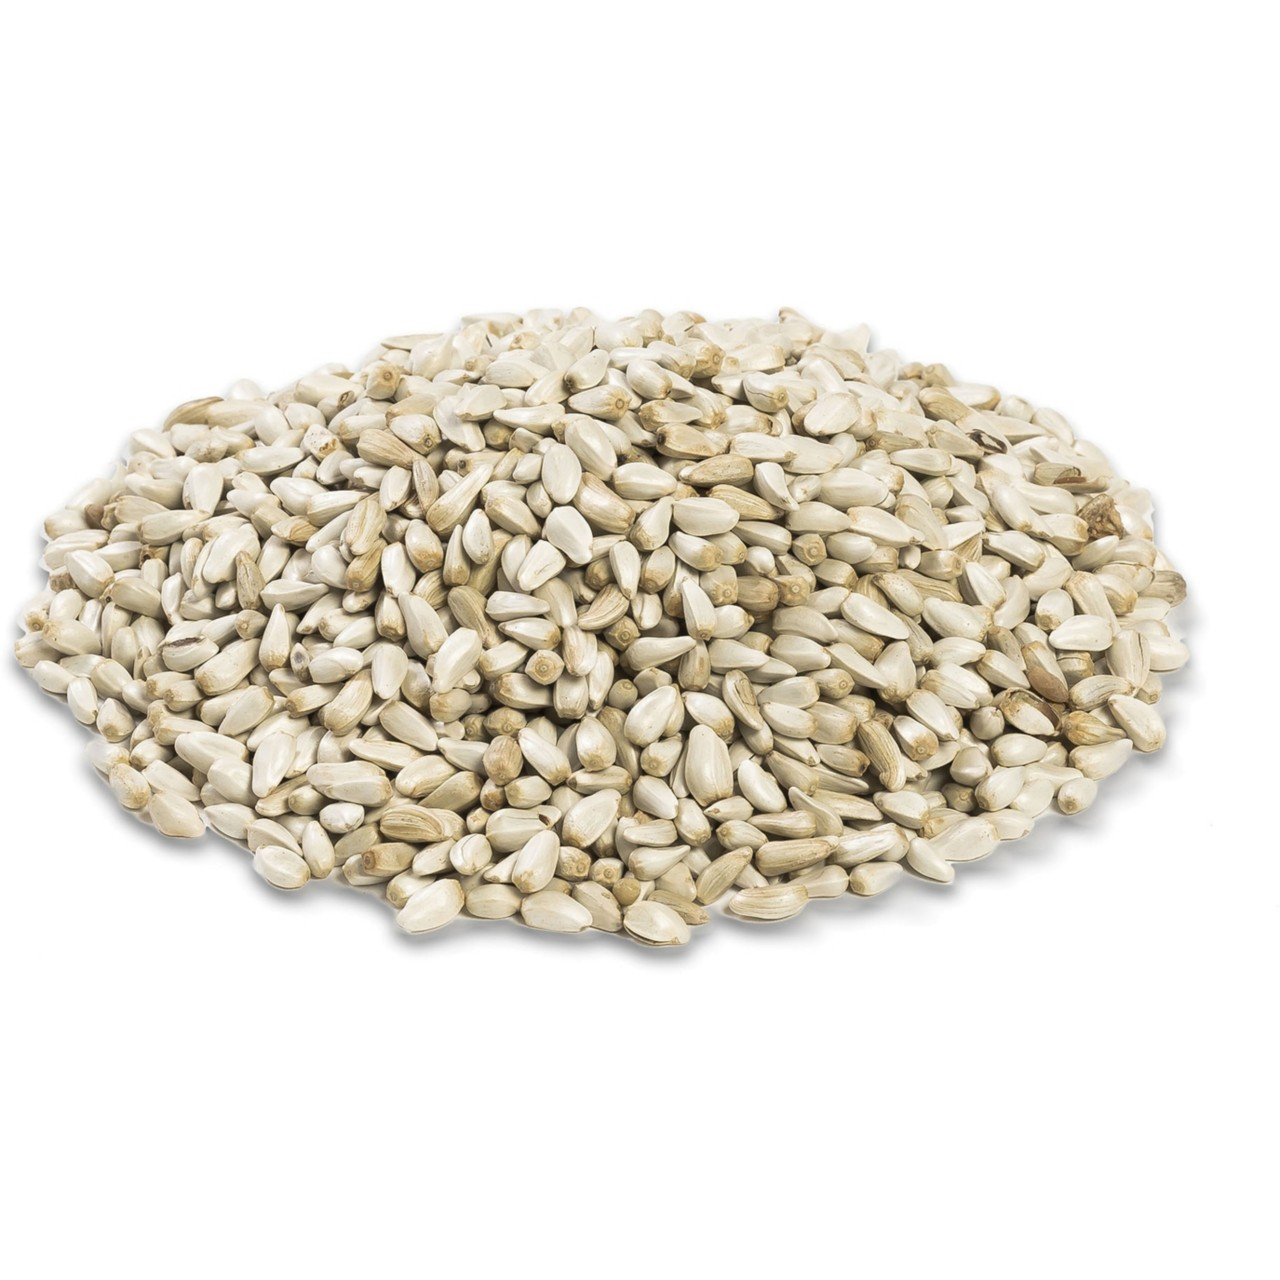 Image of a pile of safflower bird seed.